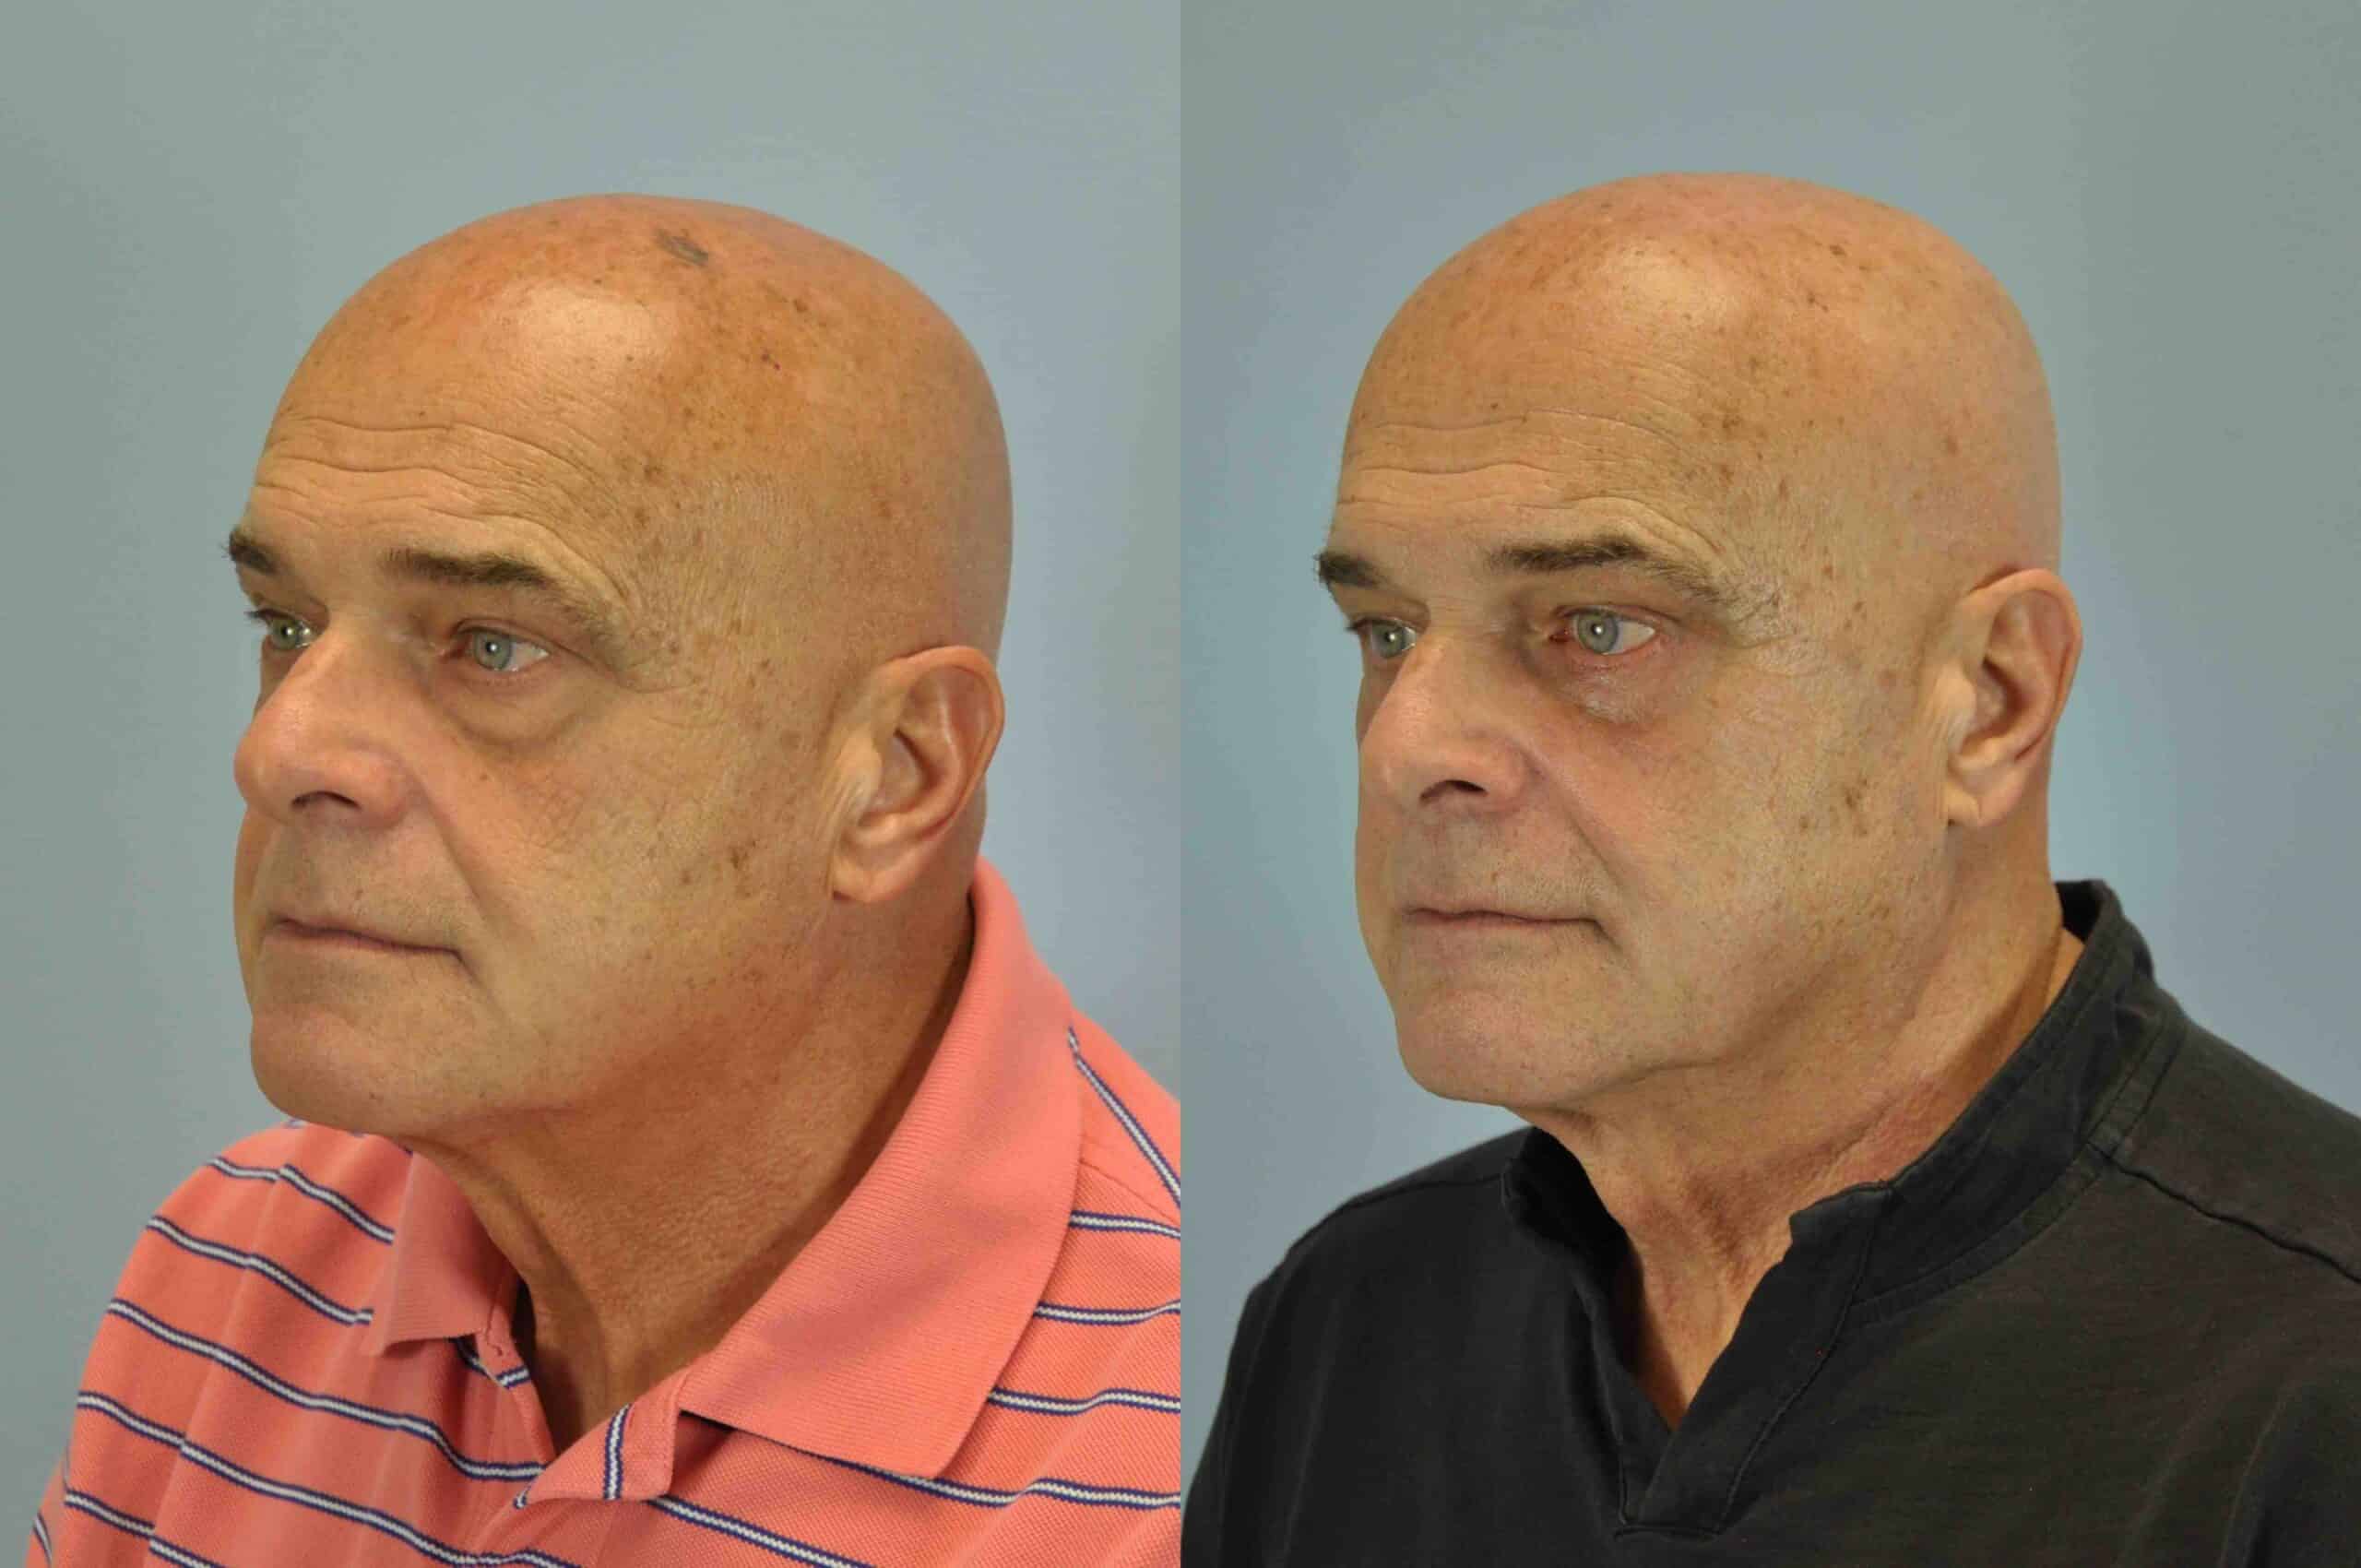 Before and after, 3 mo post op from lower blepharoplasty, canthopexy performed by Dr. Paul Vanek (diagonal view)